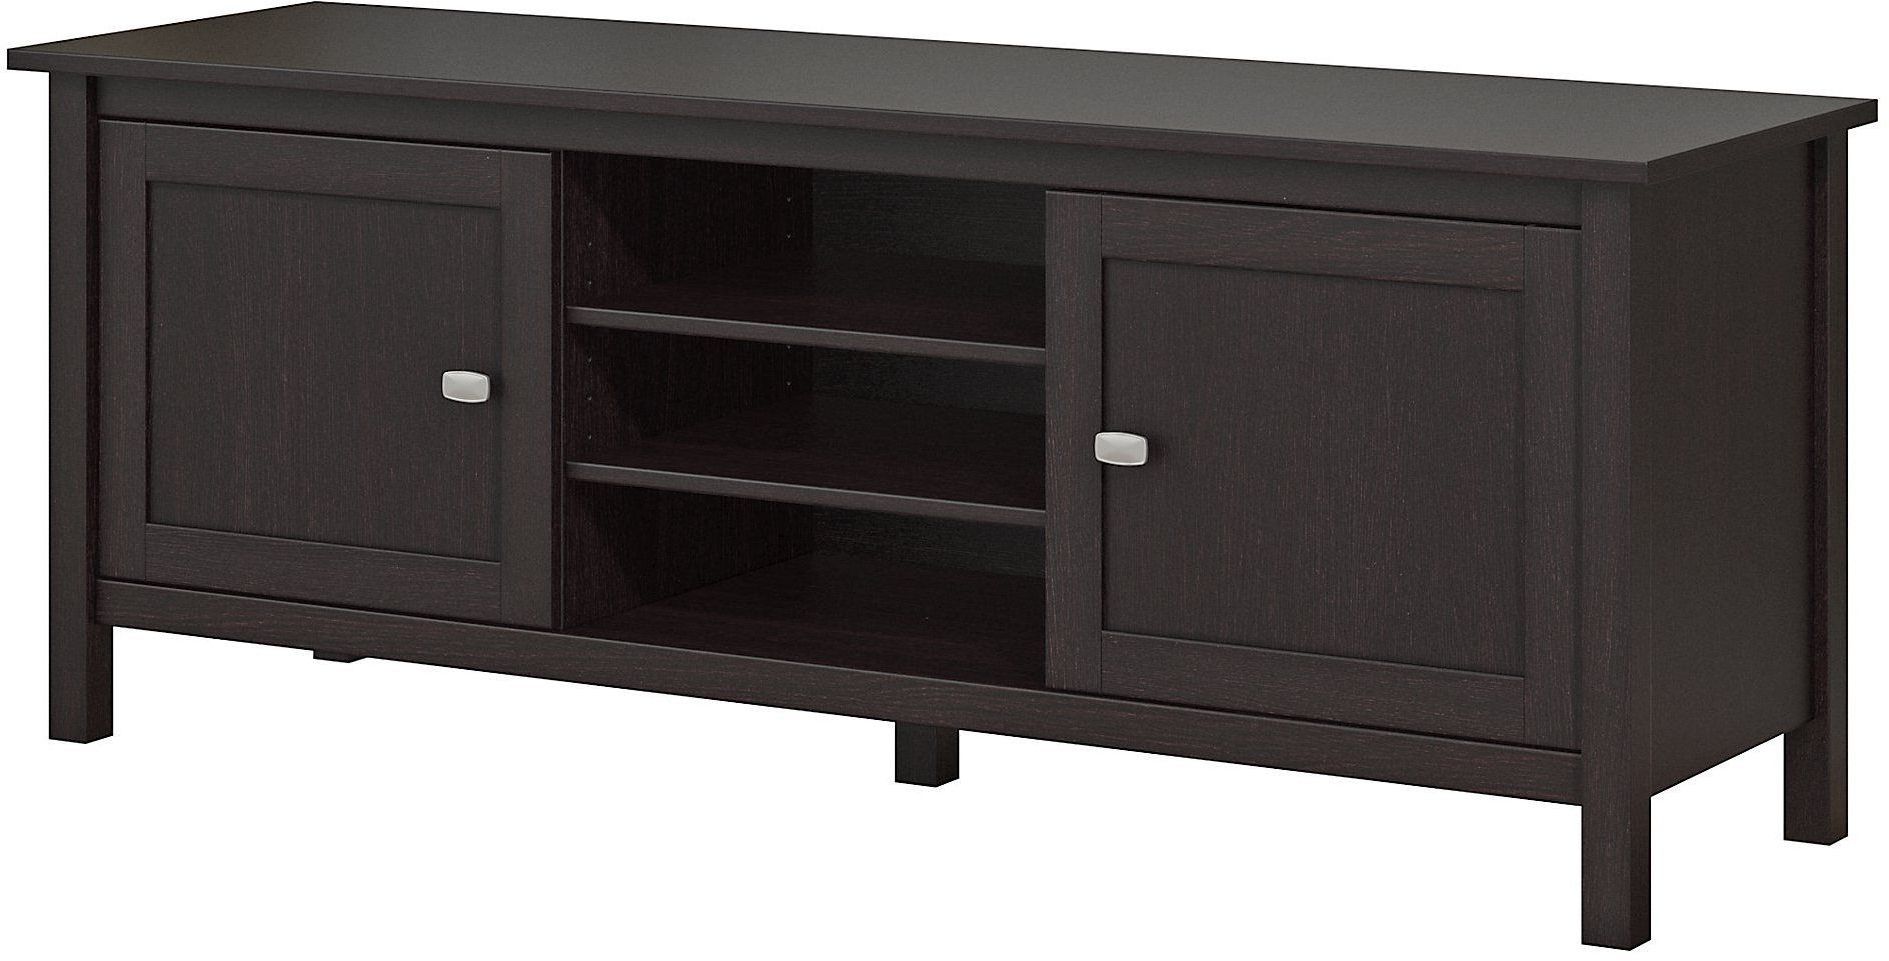 Broadview Espresso Oak 65" Tv Stand From Bush | Coleman Throughout Neilsen Tv Stands For Tvs Up To 65" (Gallery 17 of 20)